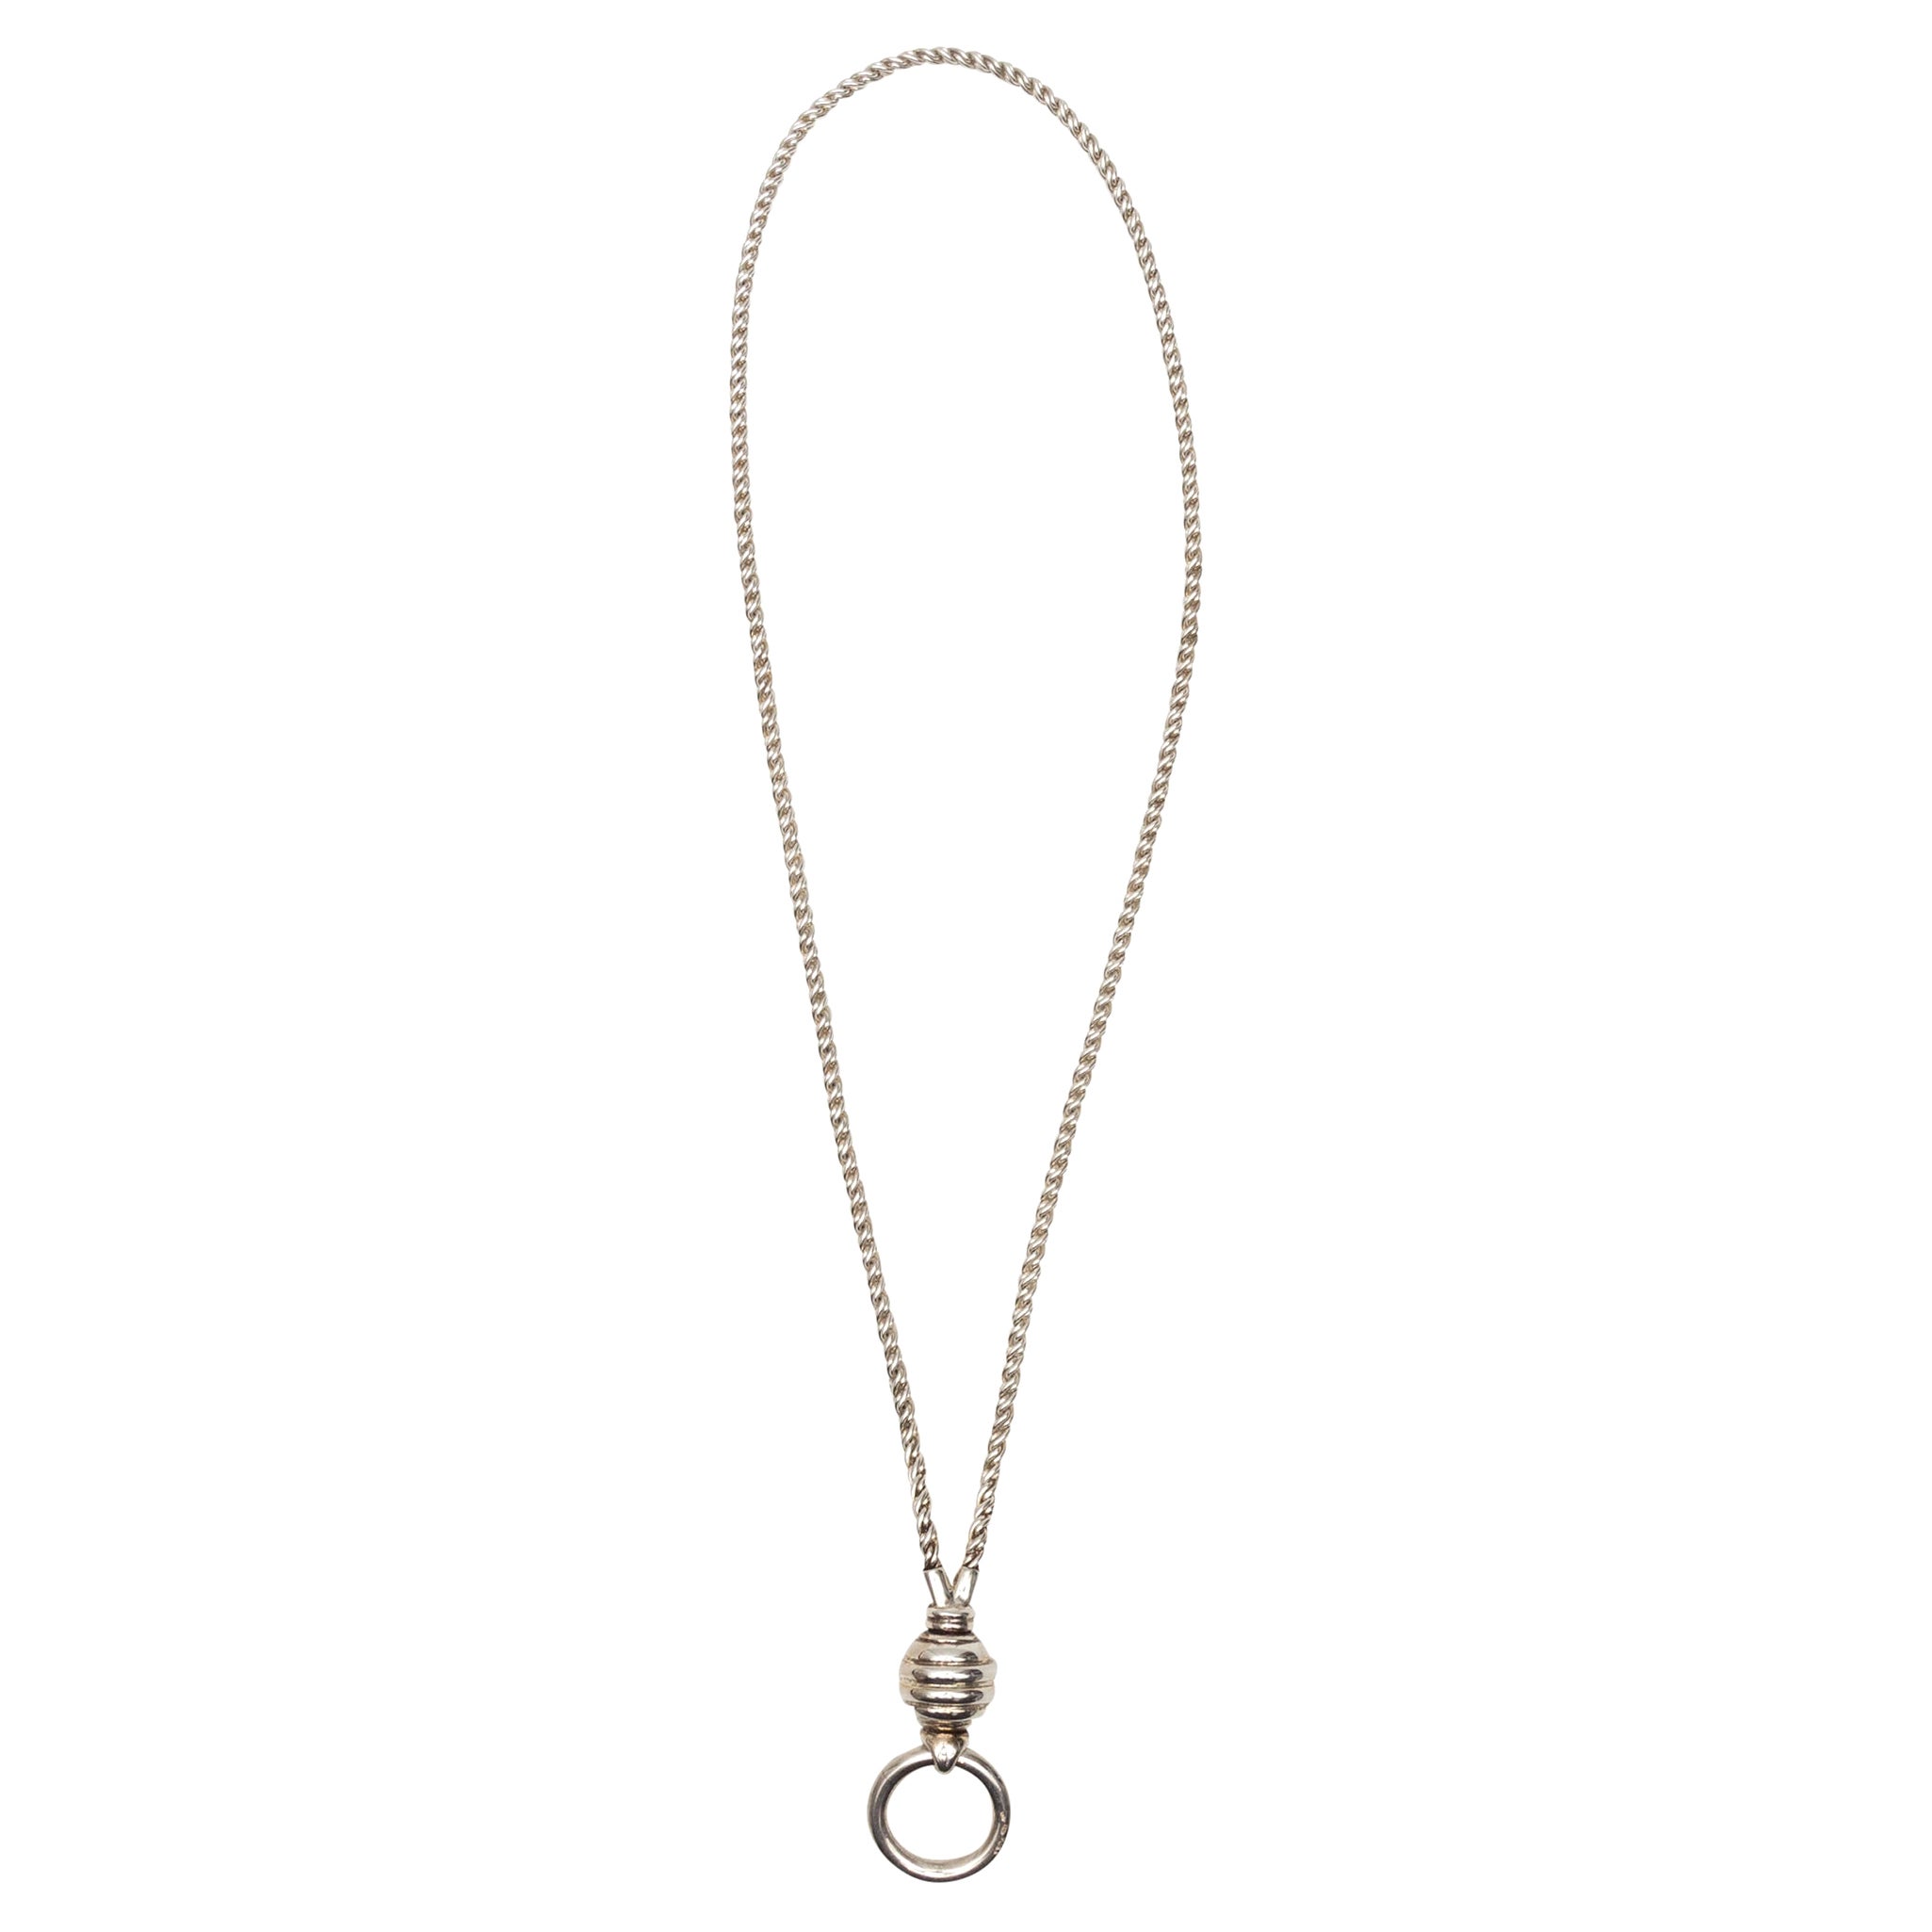 Tiffany & Co. Sterling Silver Ring Pendant Necklace